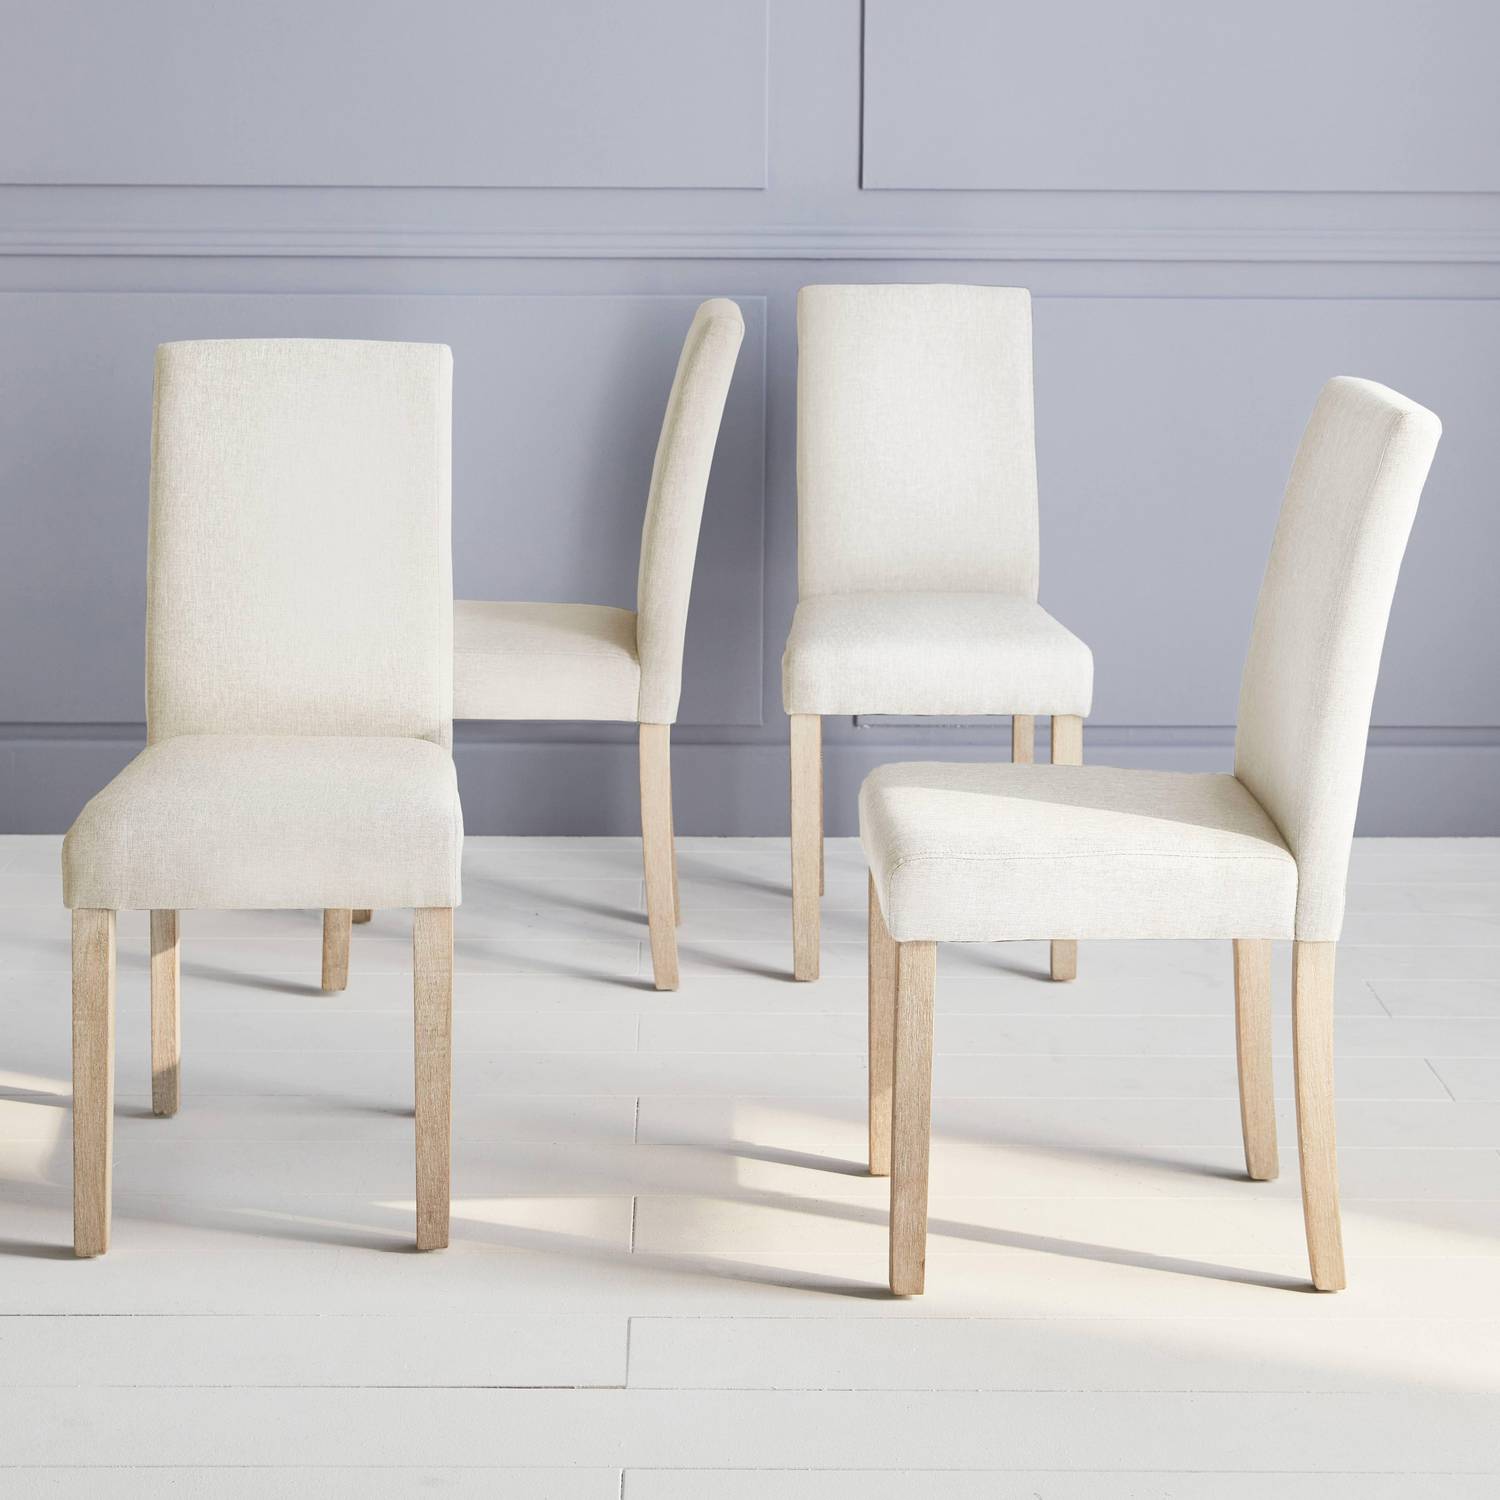 Set of 4 fabric dining chairs with wooden legs - Rita - Beige Photo1